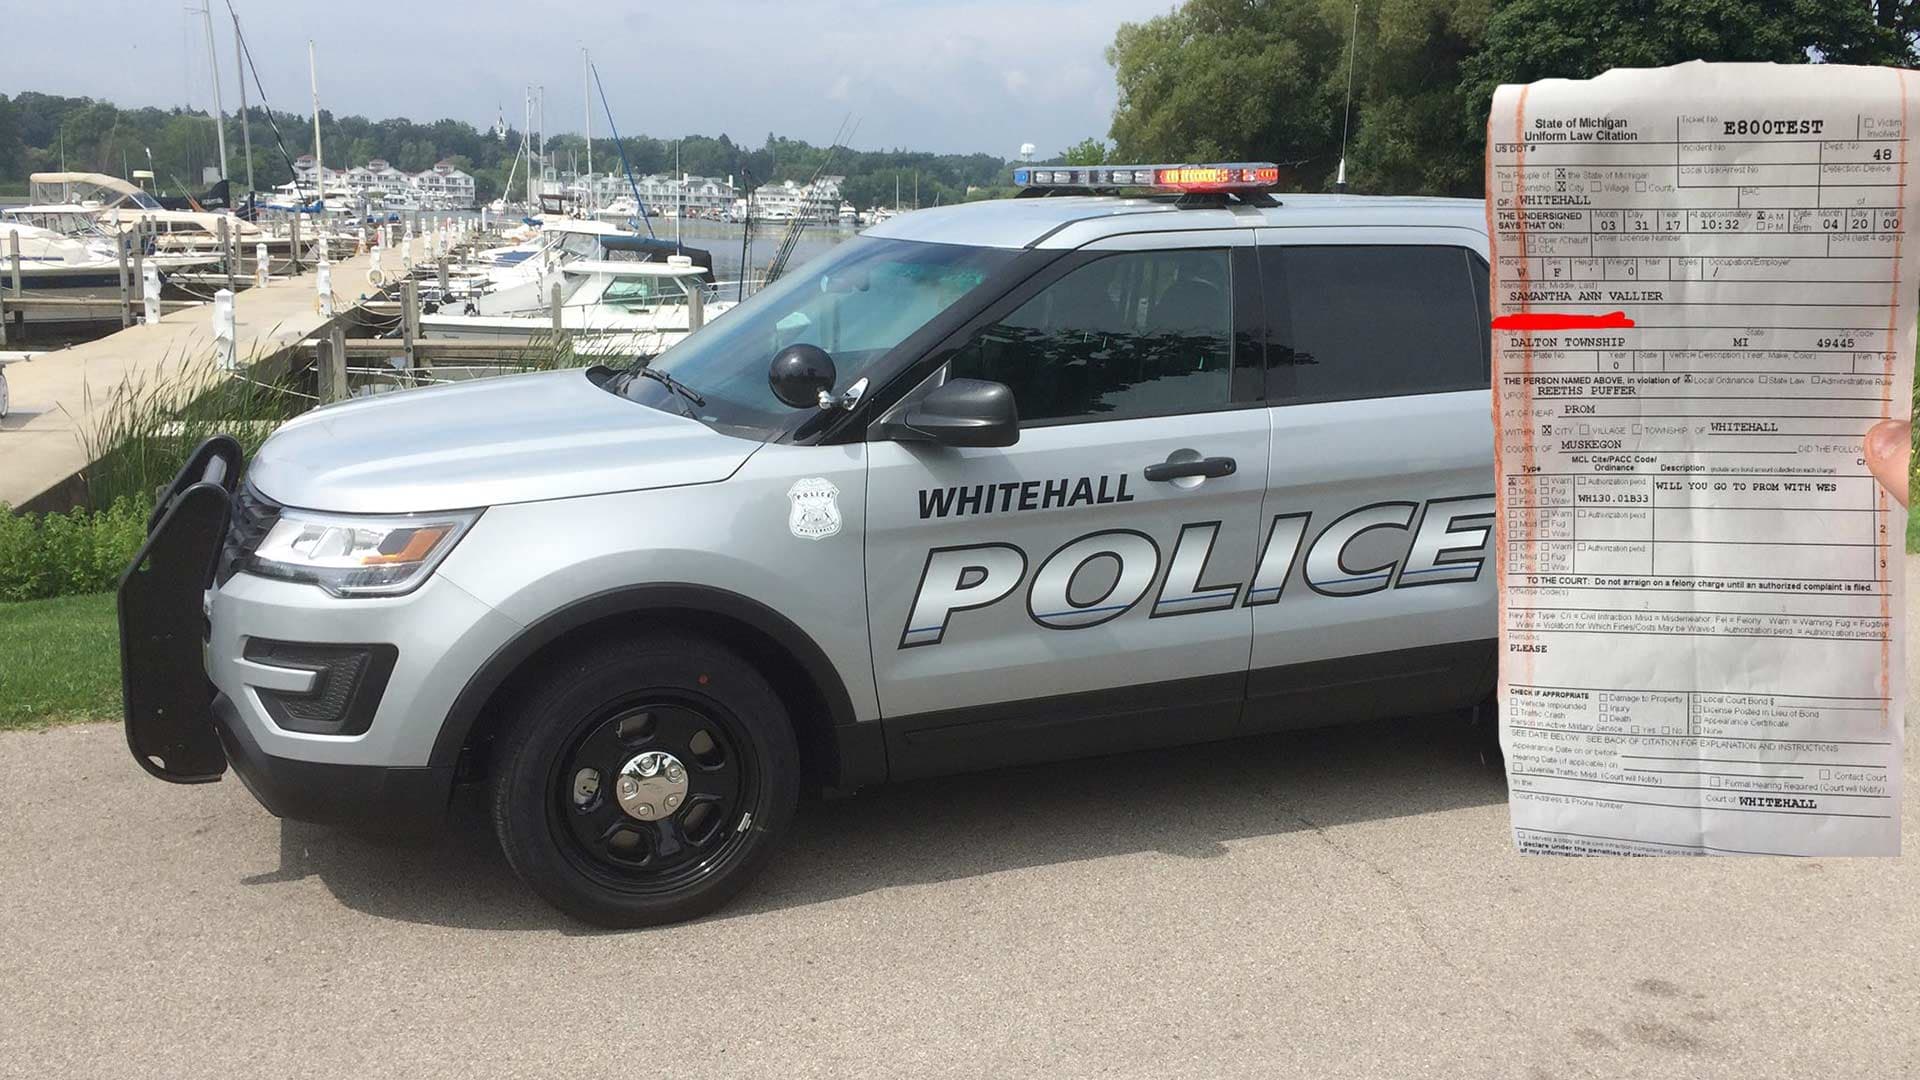 Teen Uses Whitehall Police Internship to Ask Girlfriend to Prom